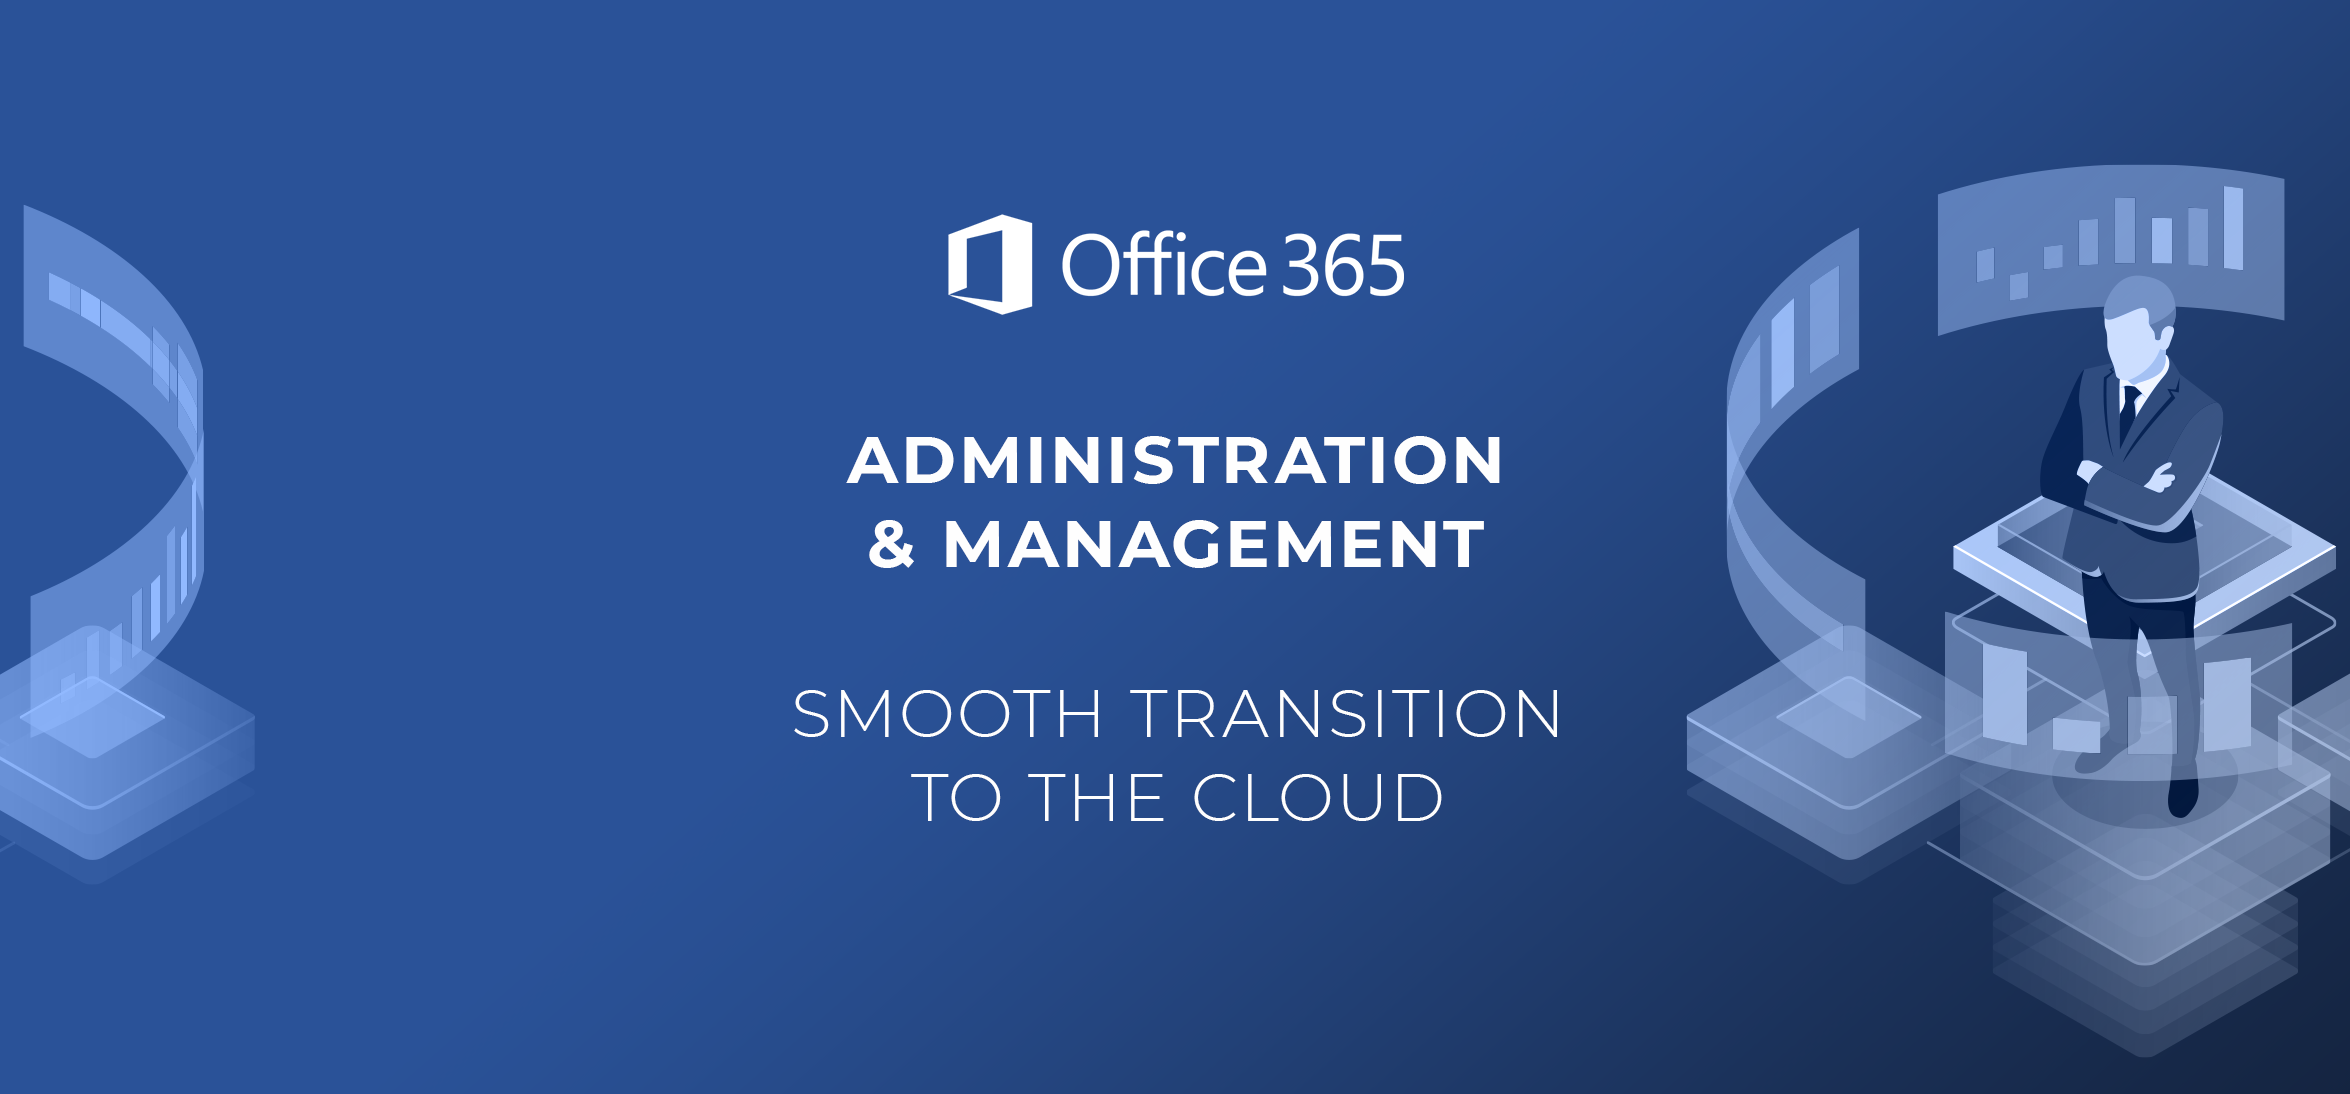 Microsoft Office 365 Administration Services in Descanso CA, 91916